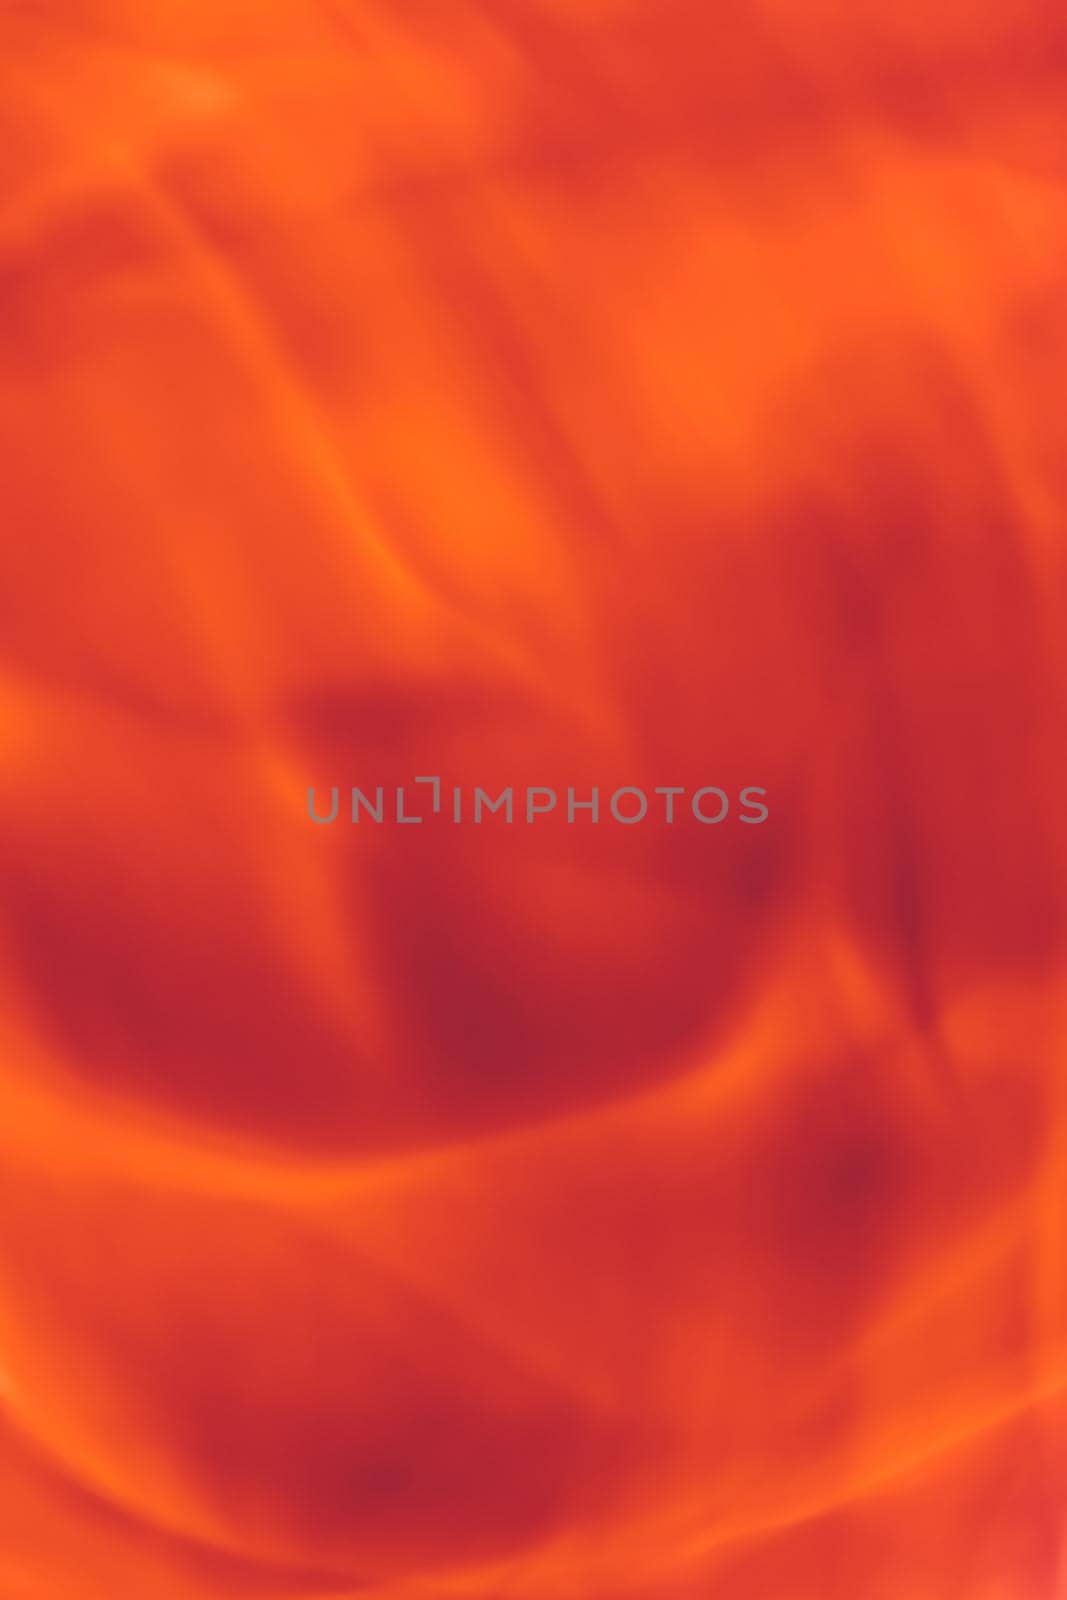 Holiday branding, beauty veil and glamour backdrop concept - Orange abstract art background, fire flame texture and wave lines for classic luxury design